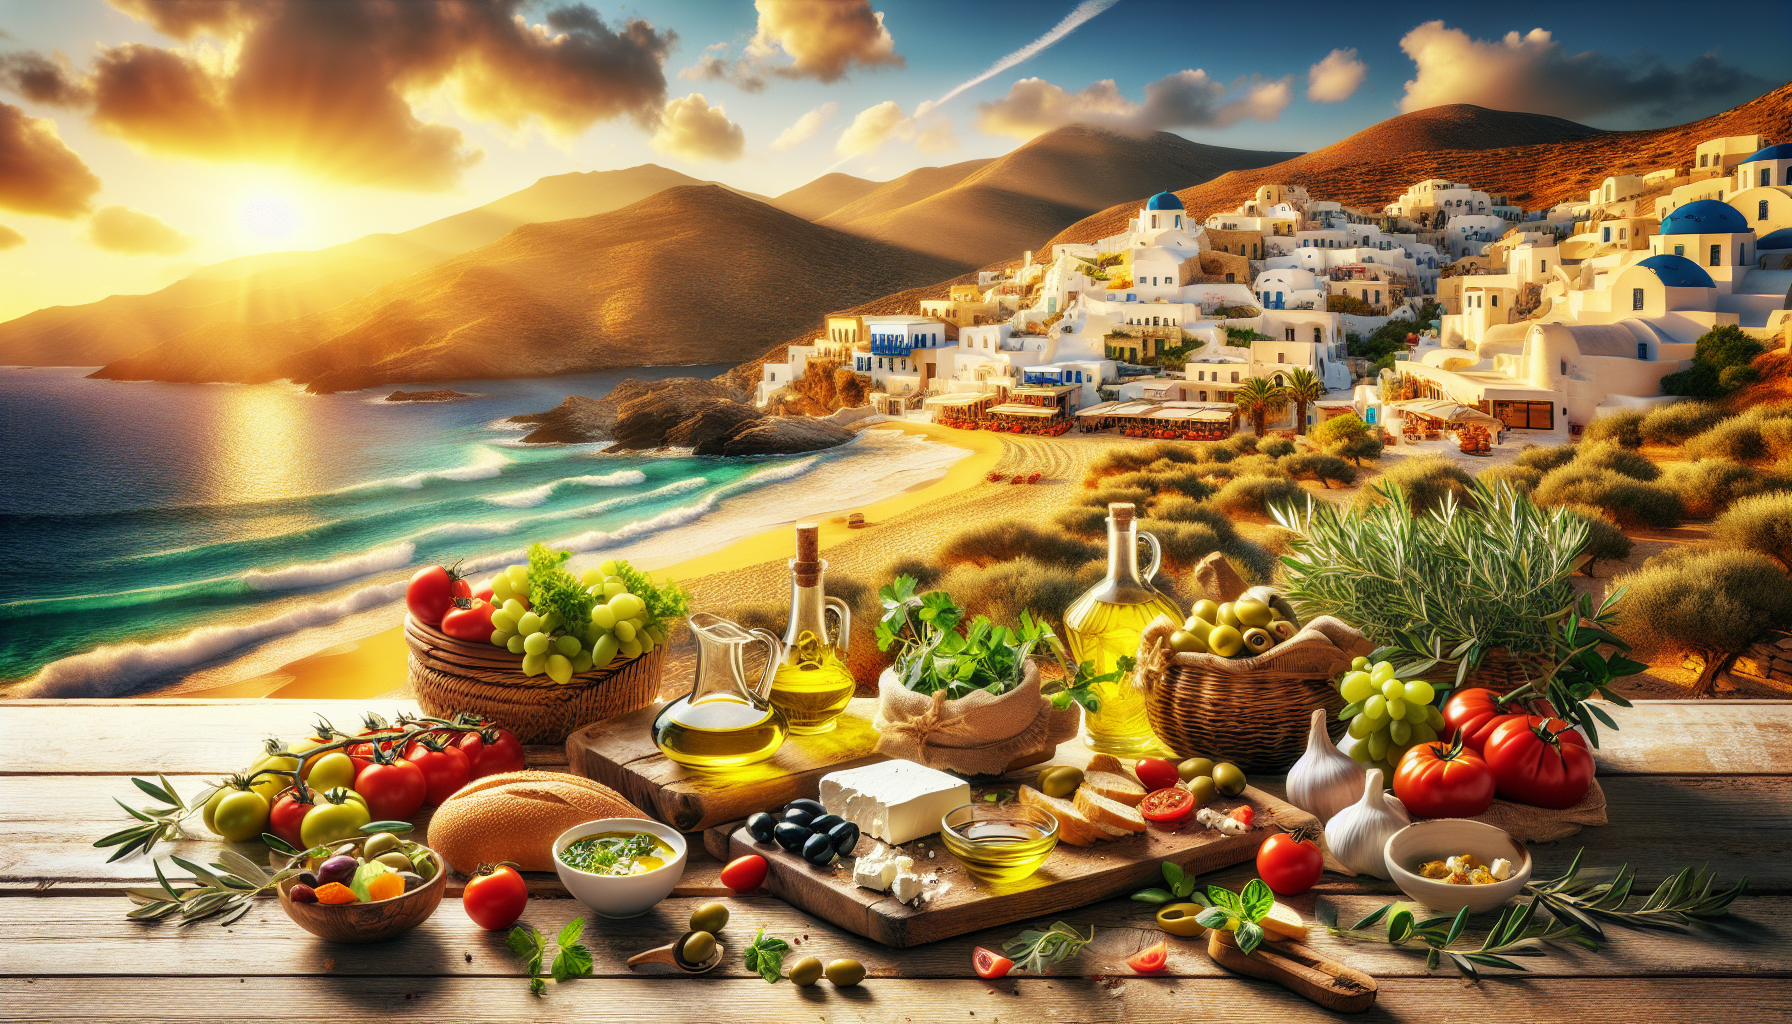 discover how to enjoy the diverse and vibrant flavors of the mediterranean with our experience.